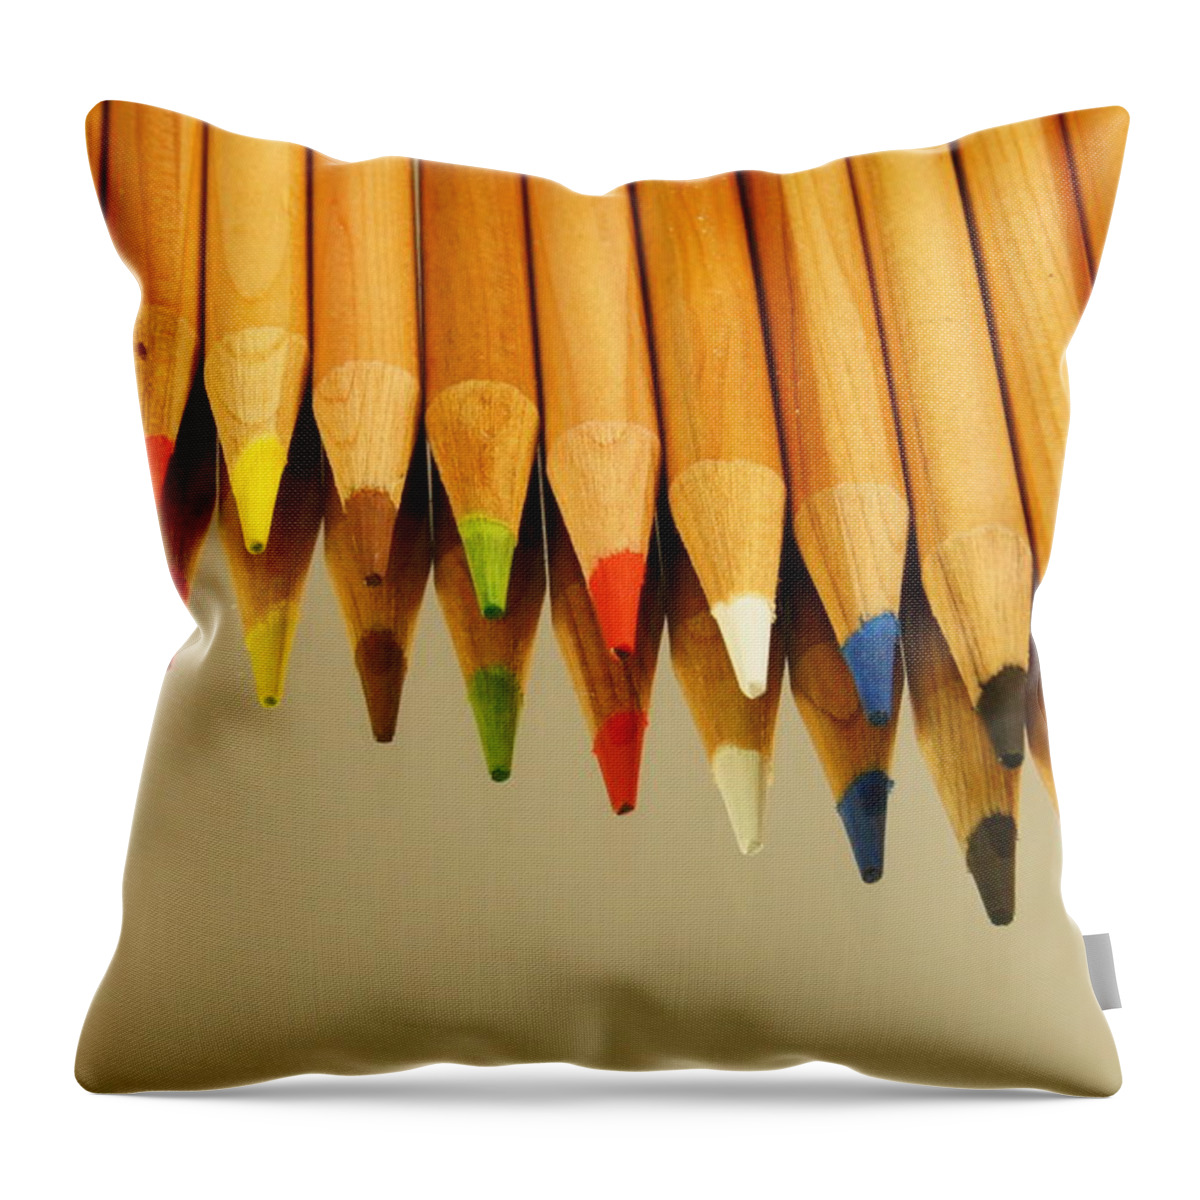 Pencils Throw Pillow featuring the photograph Colored Pencils by Kathy Churchman